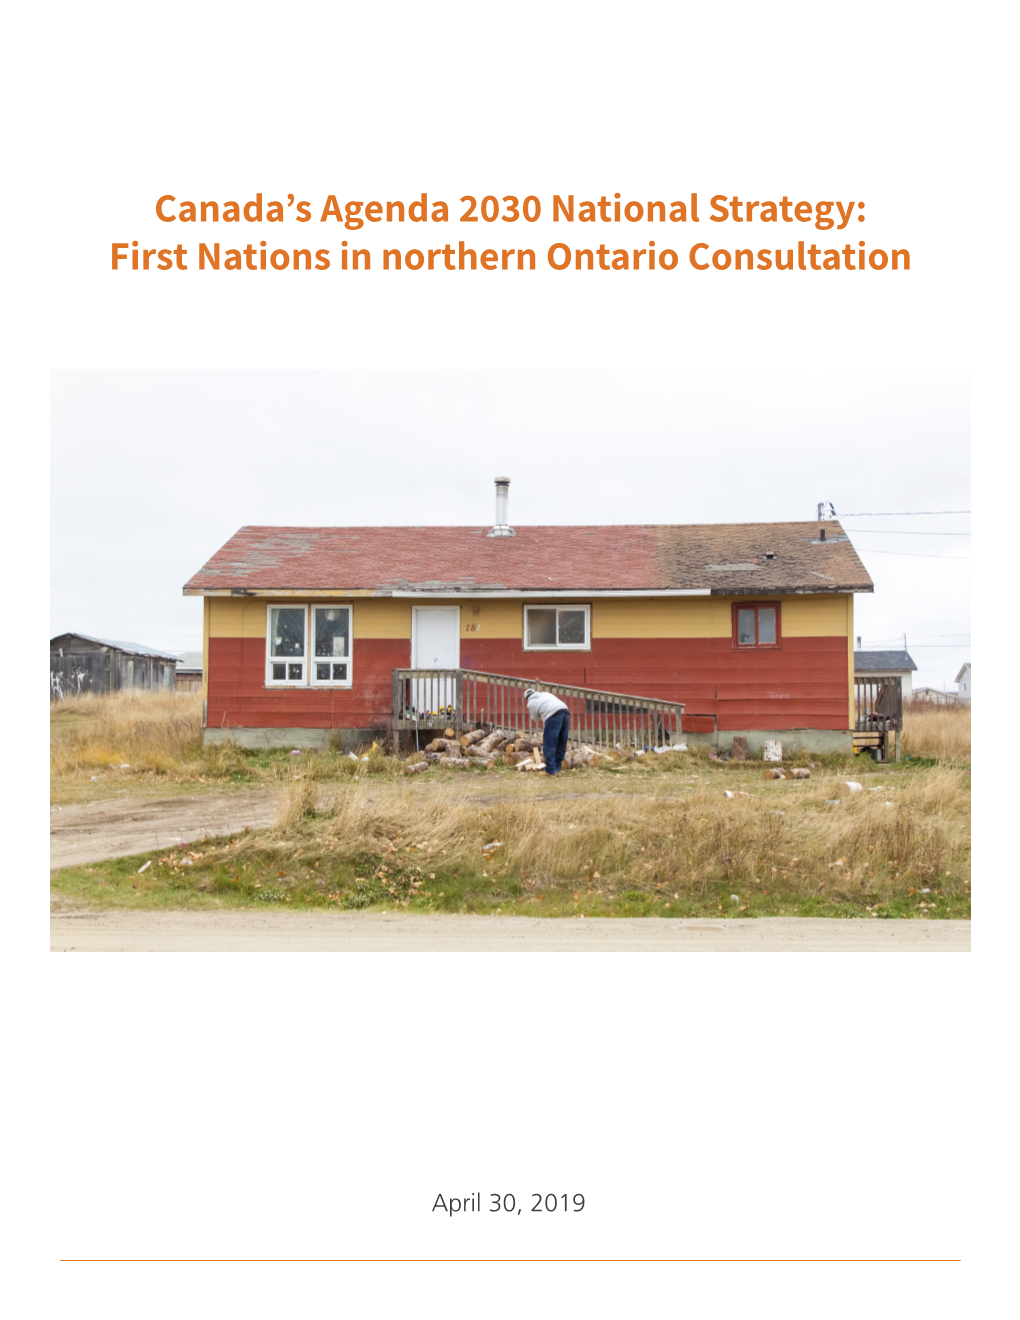 Canada's Agenda 2030 National Strategy: First Nations in Northern